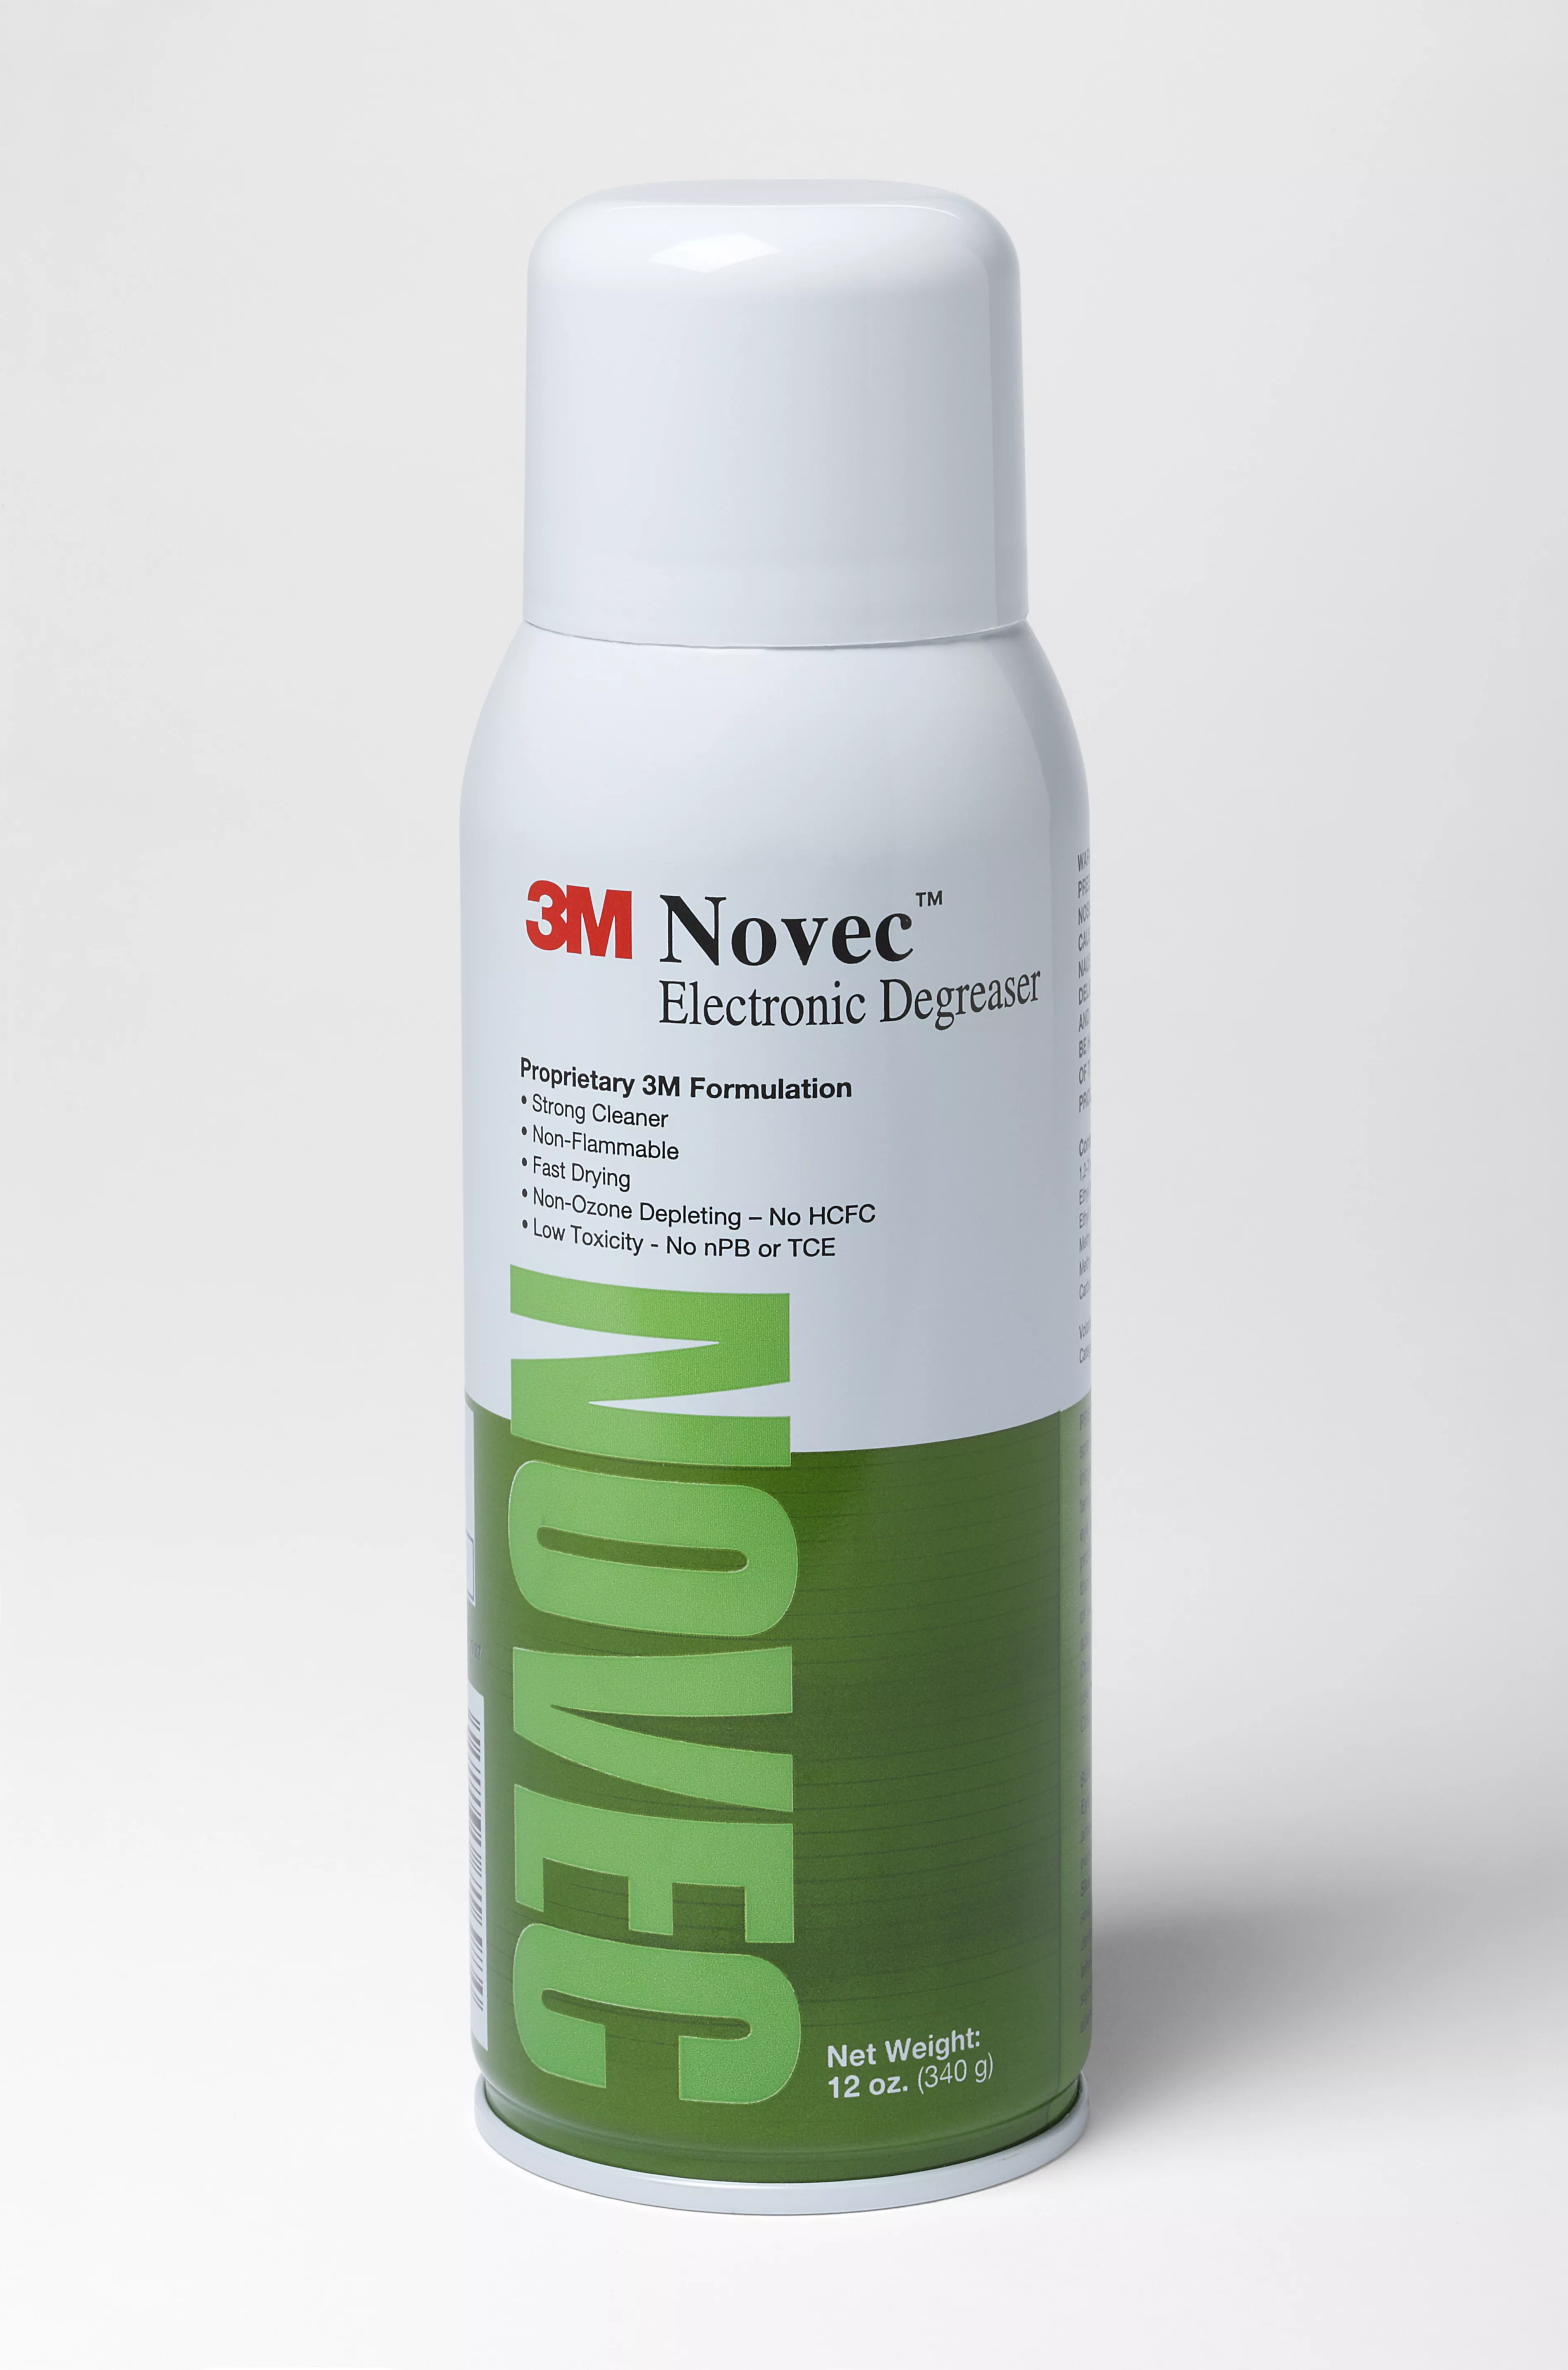 3M™ Novec™ Electronic Degreaser, 340 g (12 oz), 6 Canisters/Case